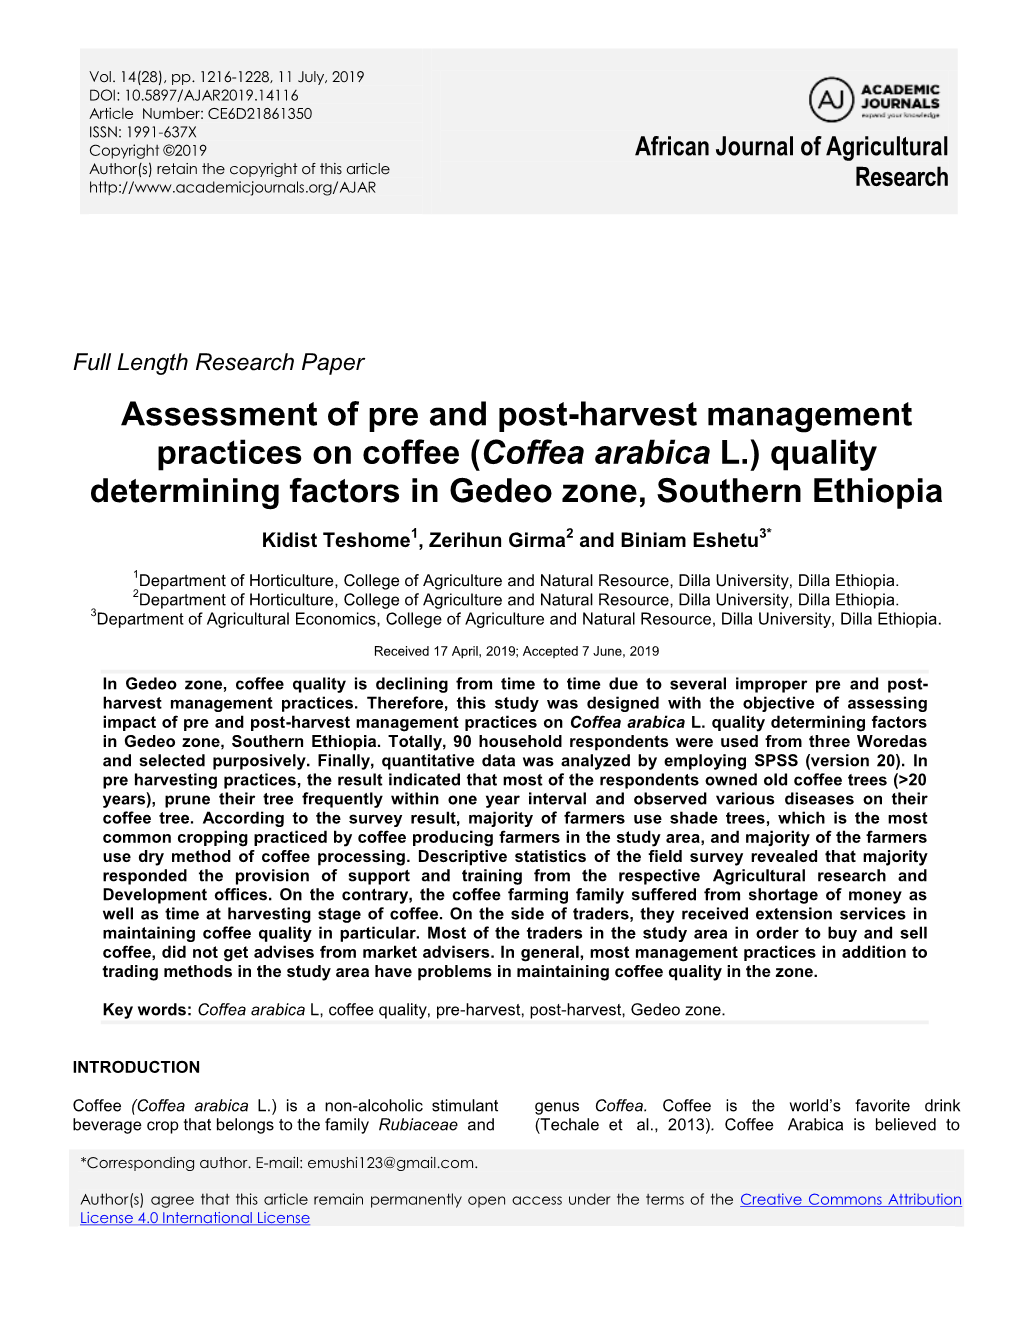 (Coffea Arabica L.) Quality Determining Factors in Gedeo Zone, Southern Ethiopia